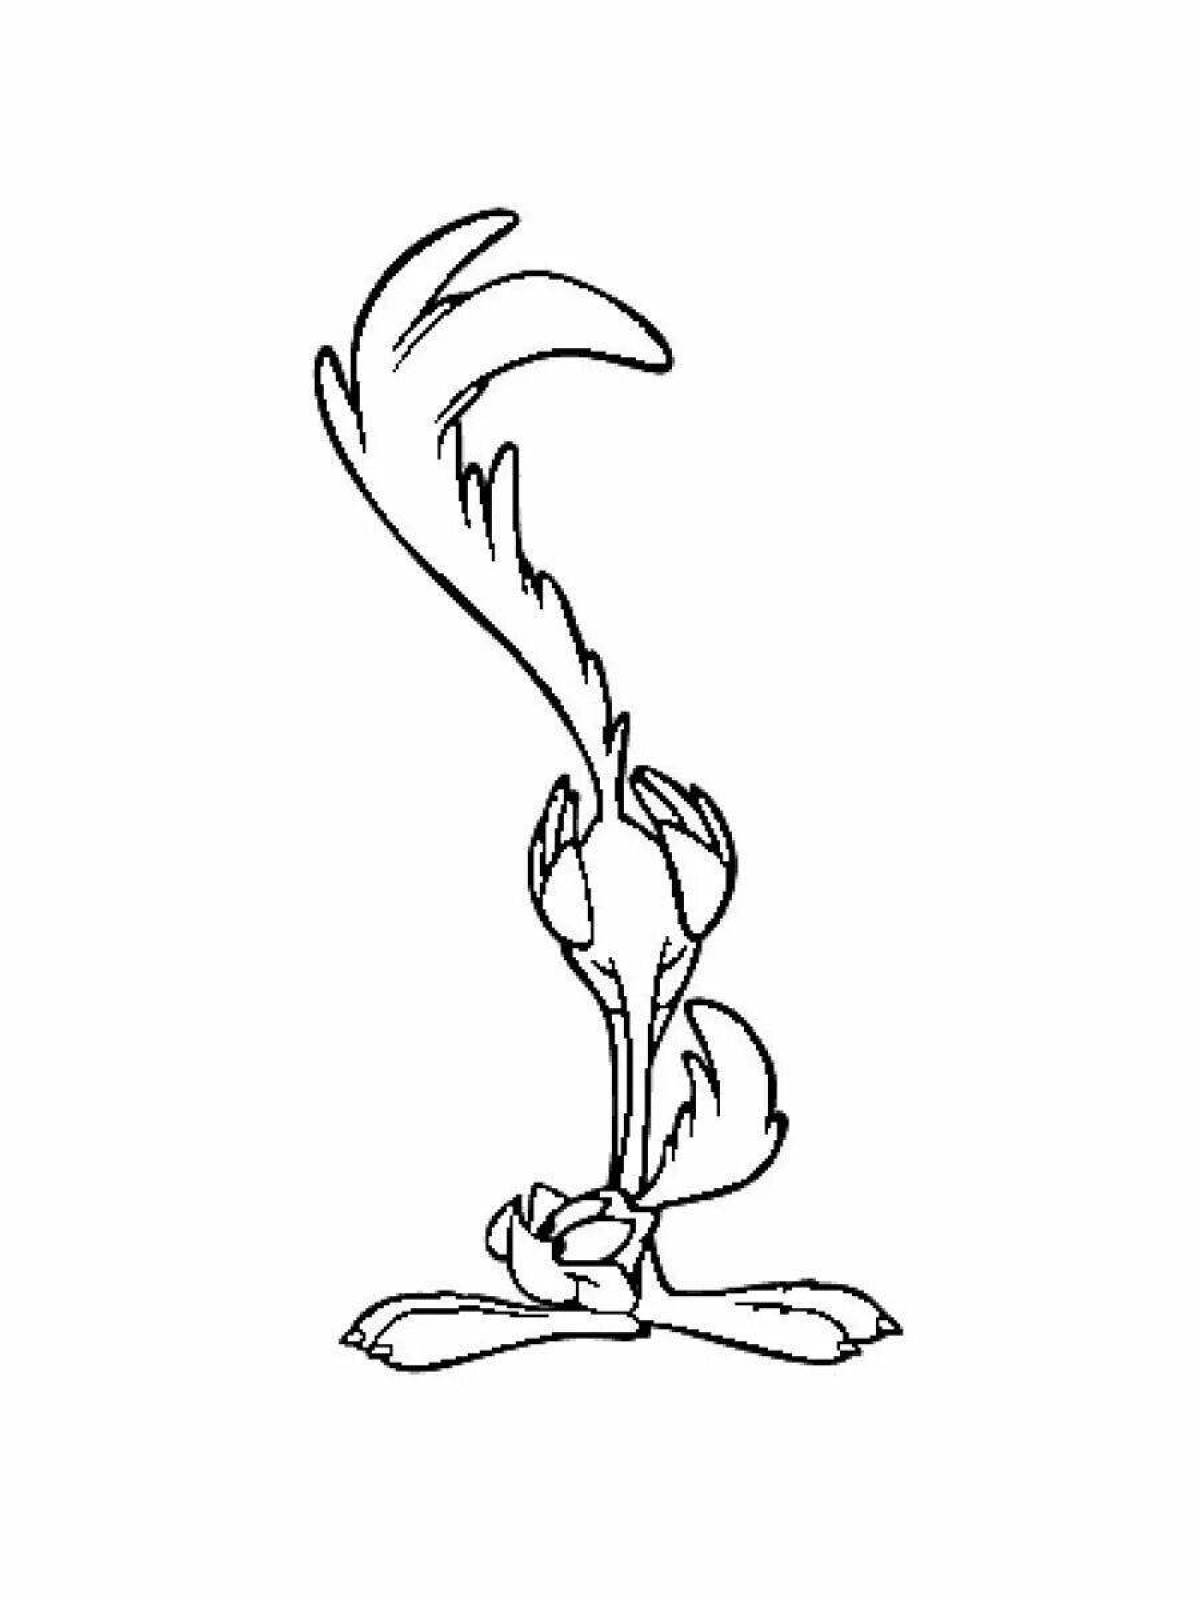 Coloring page bright road runner